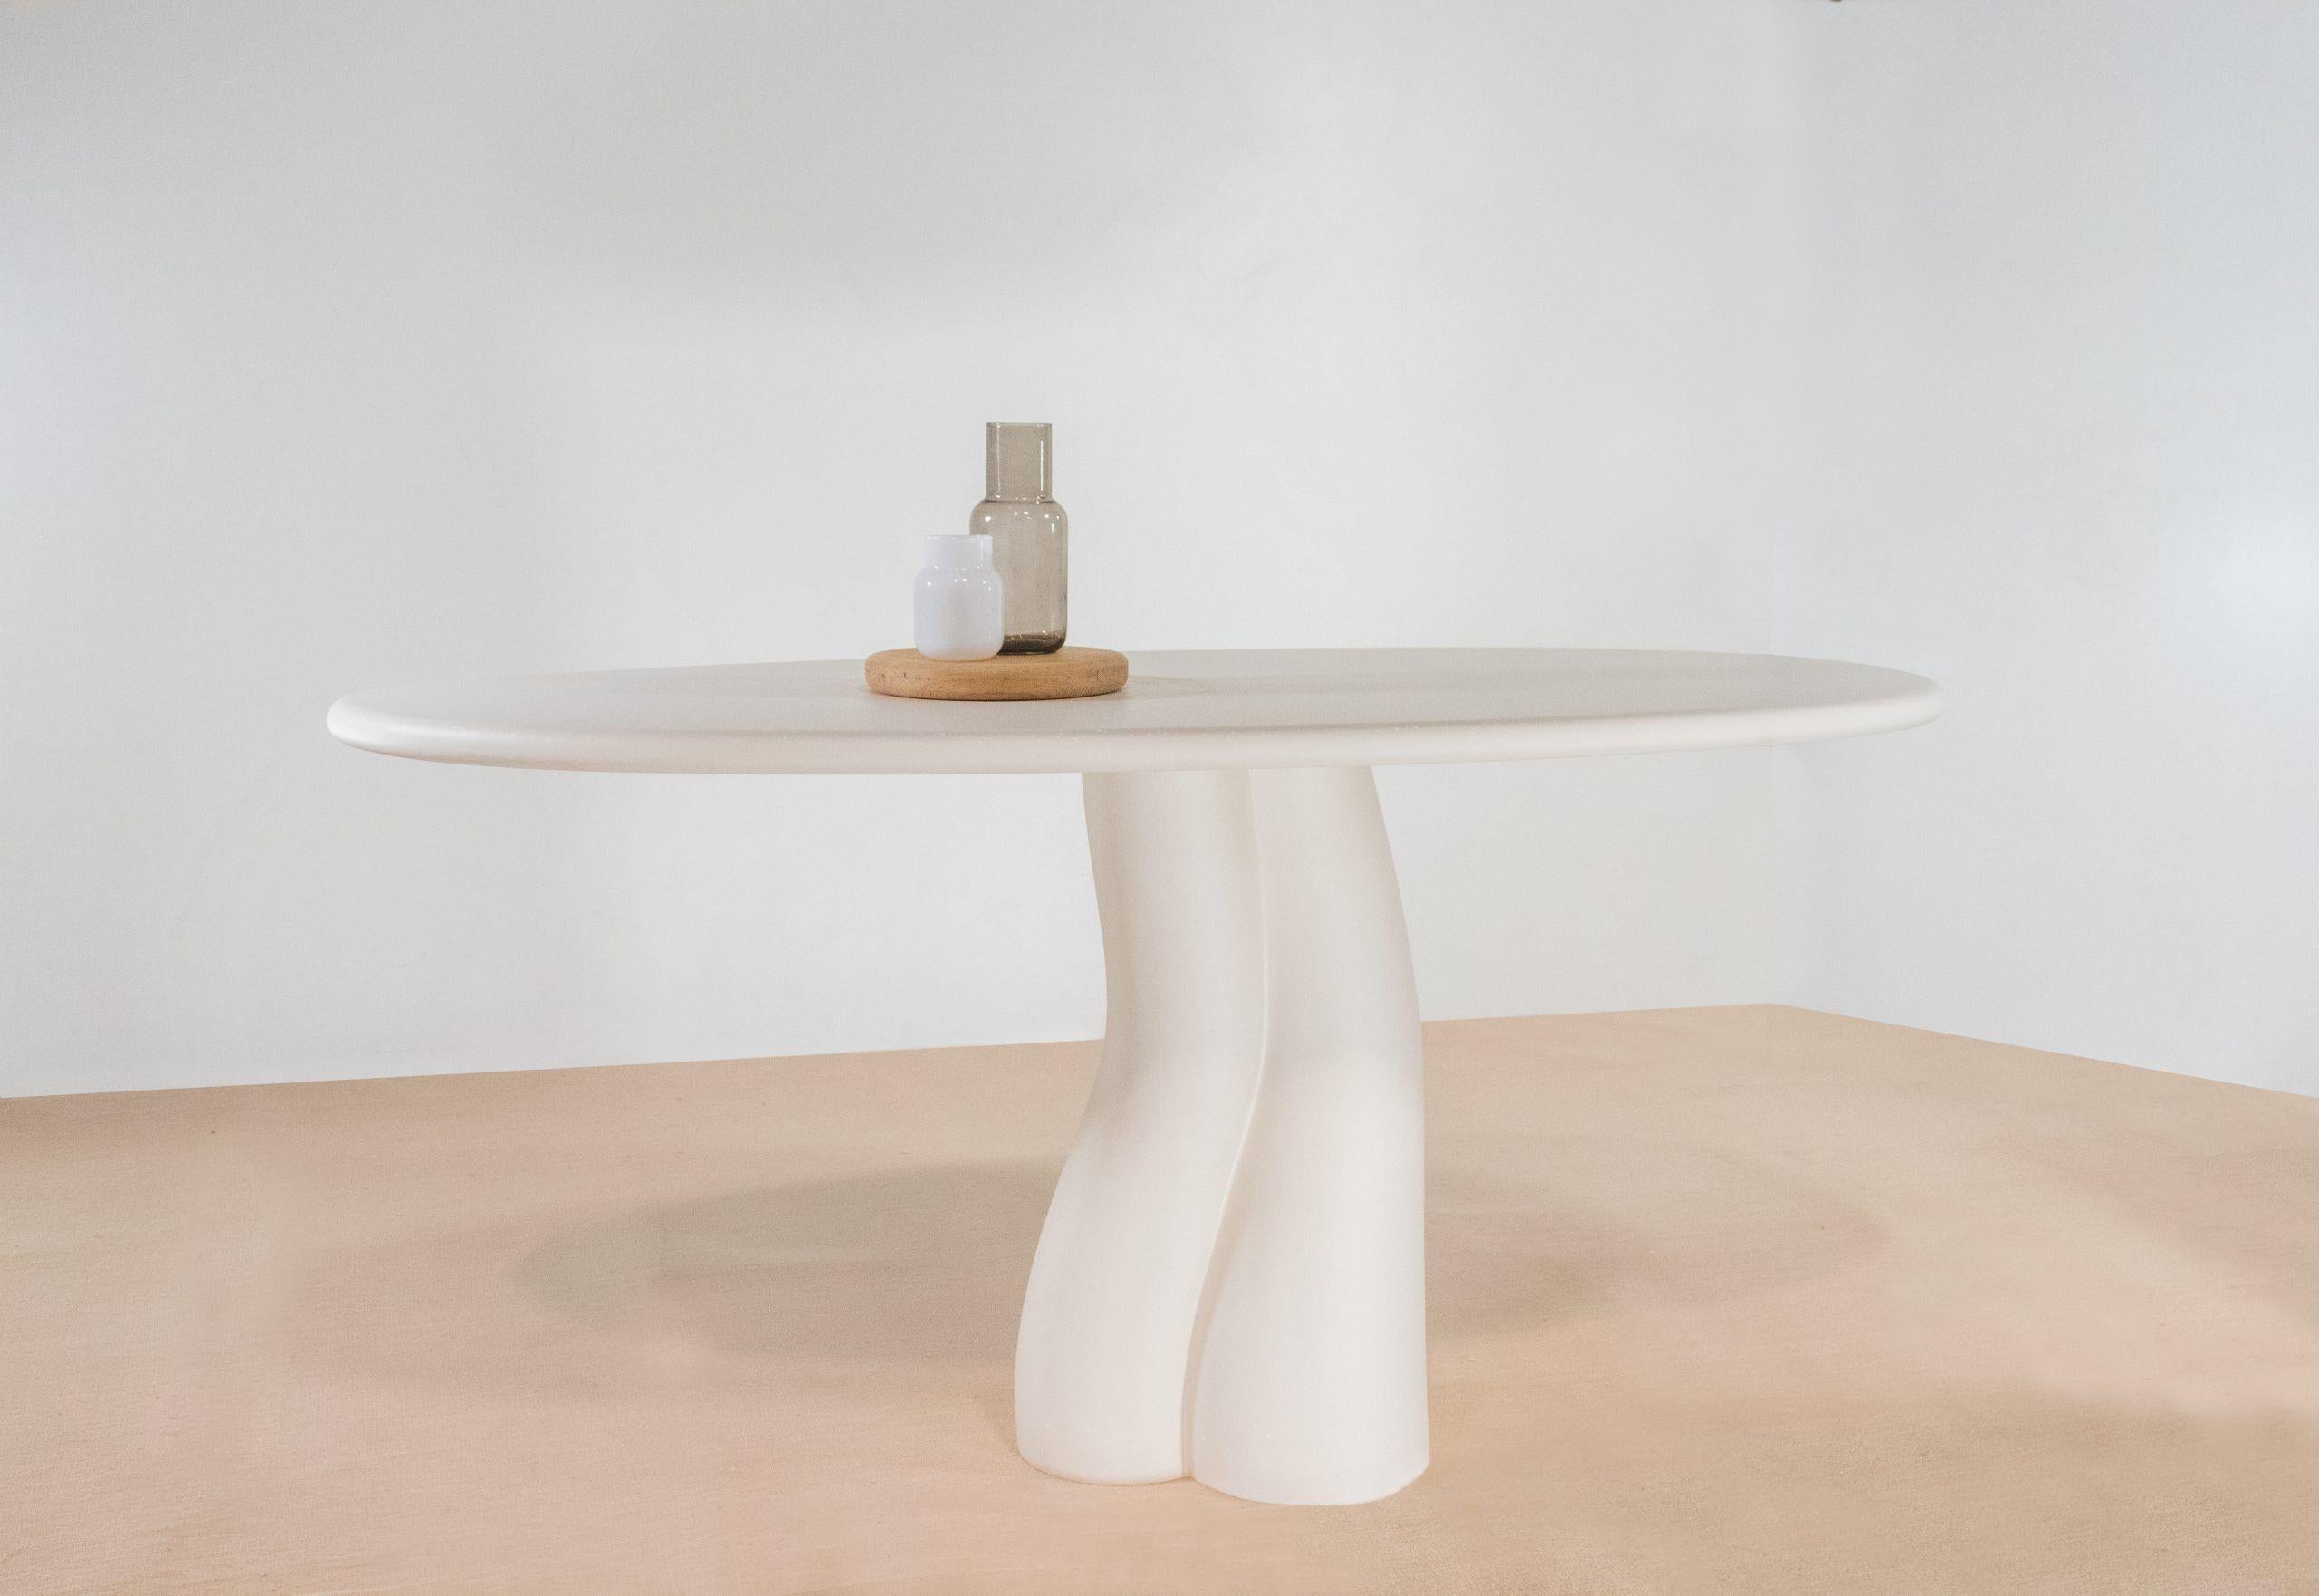 Handmade moon table signed by Gigi Design
Dimensions: L 150 x D 75 x H 74 cm
Materials: Lacquer.
The lacquer is structured by hand. 

The Moon table is a real handmade sculpture. 
A lacquer with slight crater effects gives this table a lunar